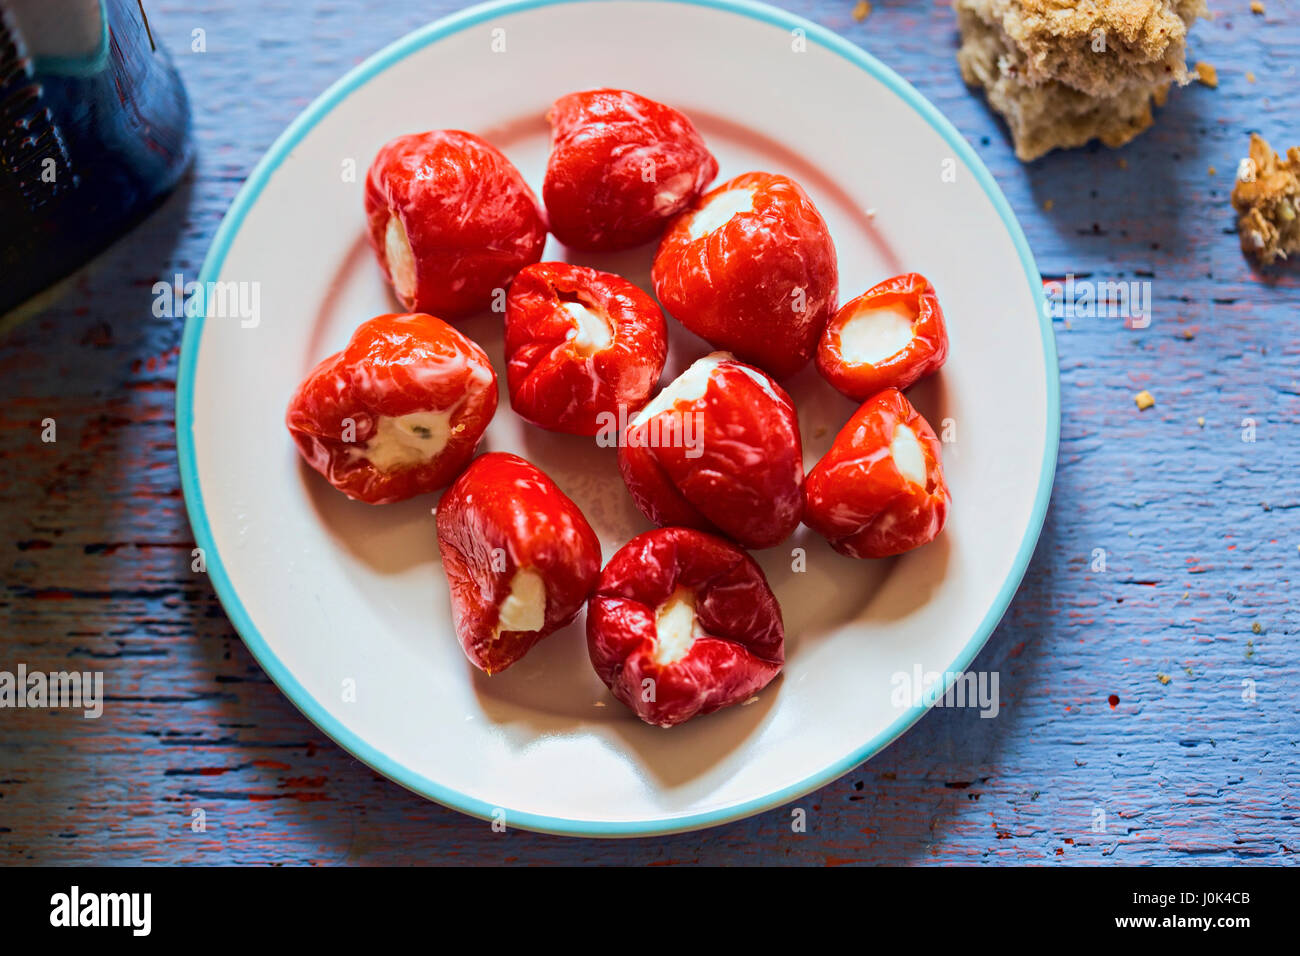 Peppers stuffed with feta cheese on white plate Stock Photo